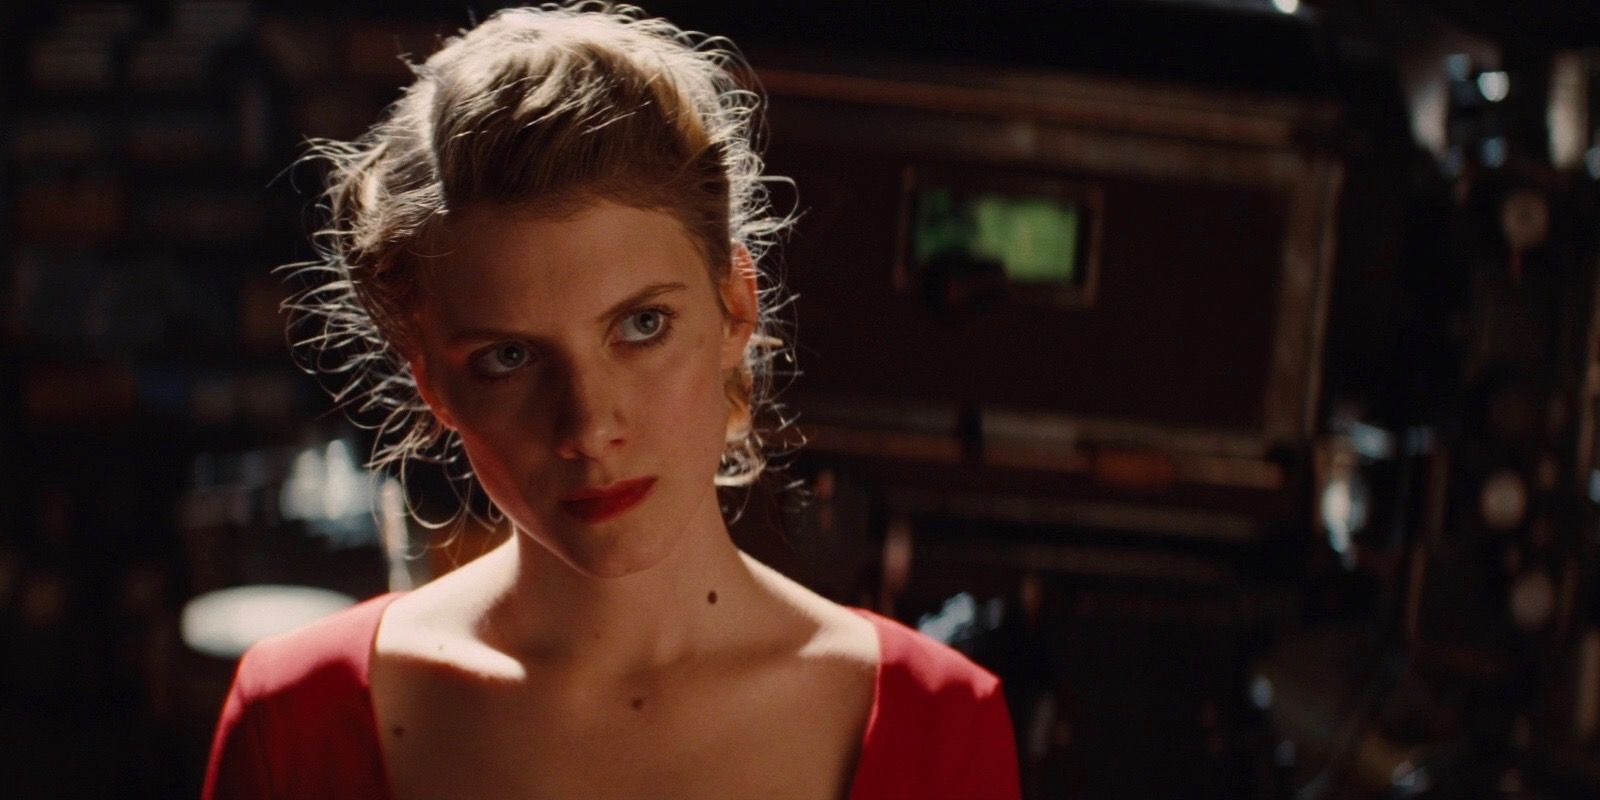 Shosanna tries to get Zoller to leave the control room in Inglorious Basterds